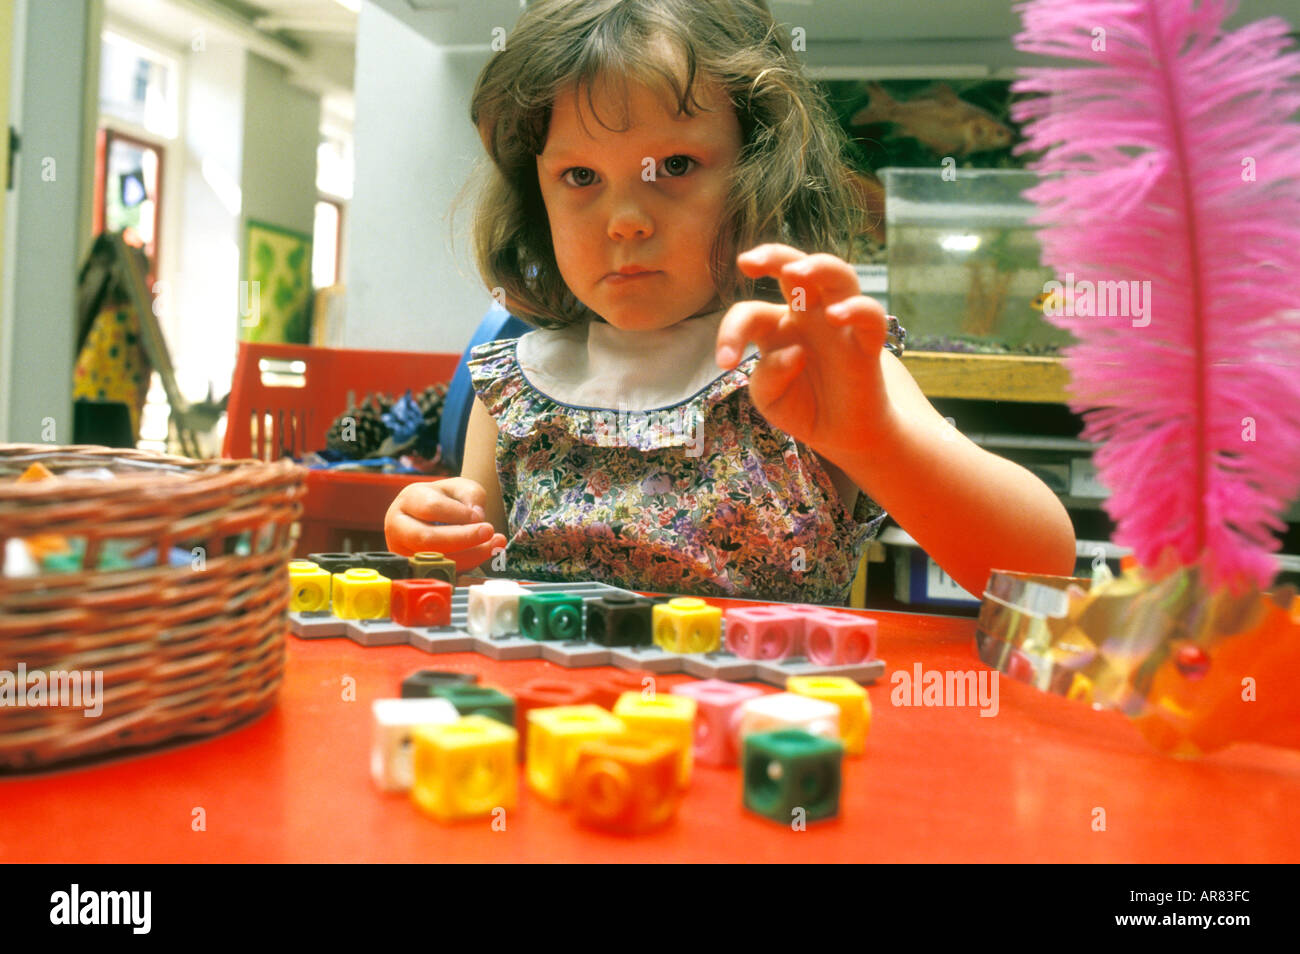 Young child learning to count with toy blocks Stock Photo